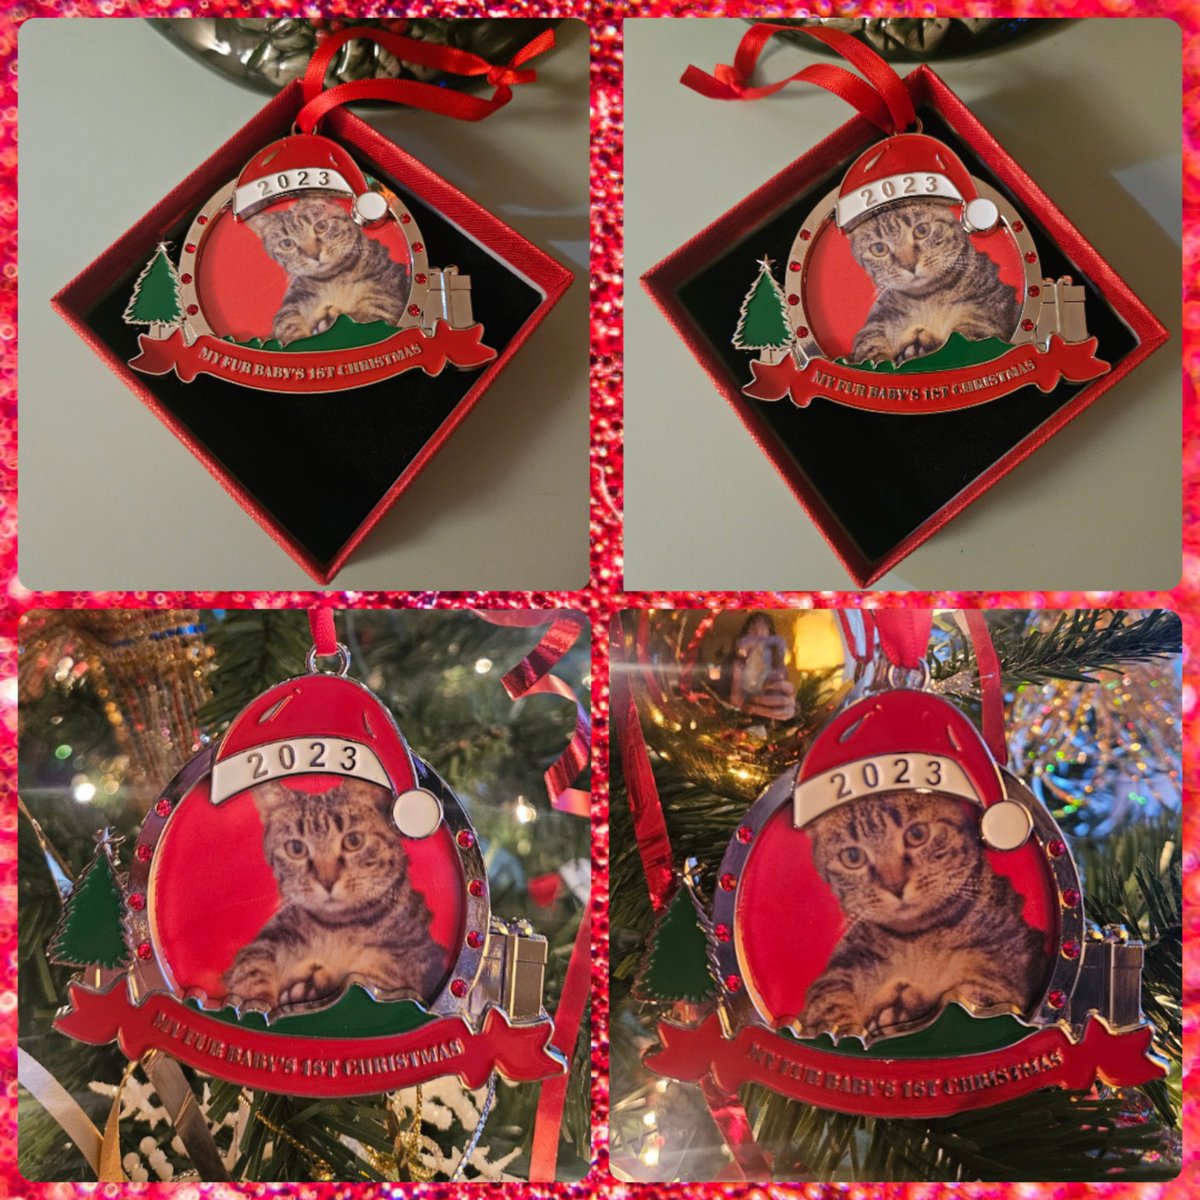 My Aunt's made this Ornament for Christmas for my baby Kitten Caroline. It says, My Fur Baby's 1st Christmas. 2 different picture versions. 🎄🎁🐱🐈😸😻❤️💜🌟⭐️❄️☃️⛄️🕯🫎🎅🏻🥳😁😌 #Kitten #Caroline #FurBaby #KittenCaroline #Christmas #ChristmasOrnament